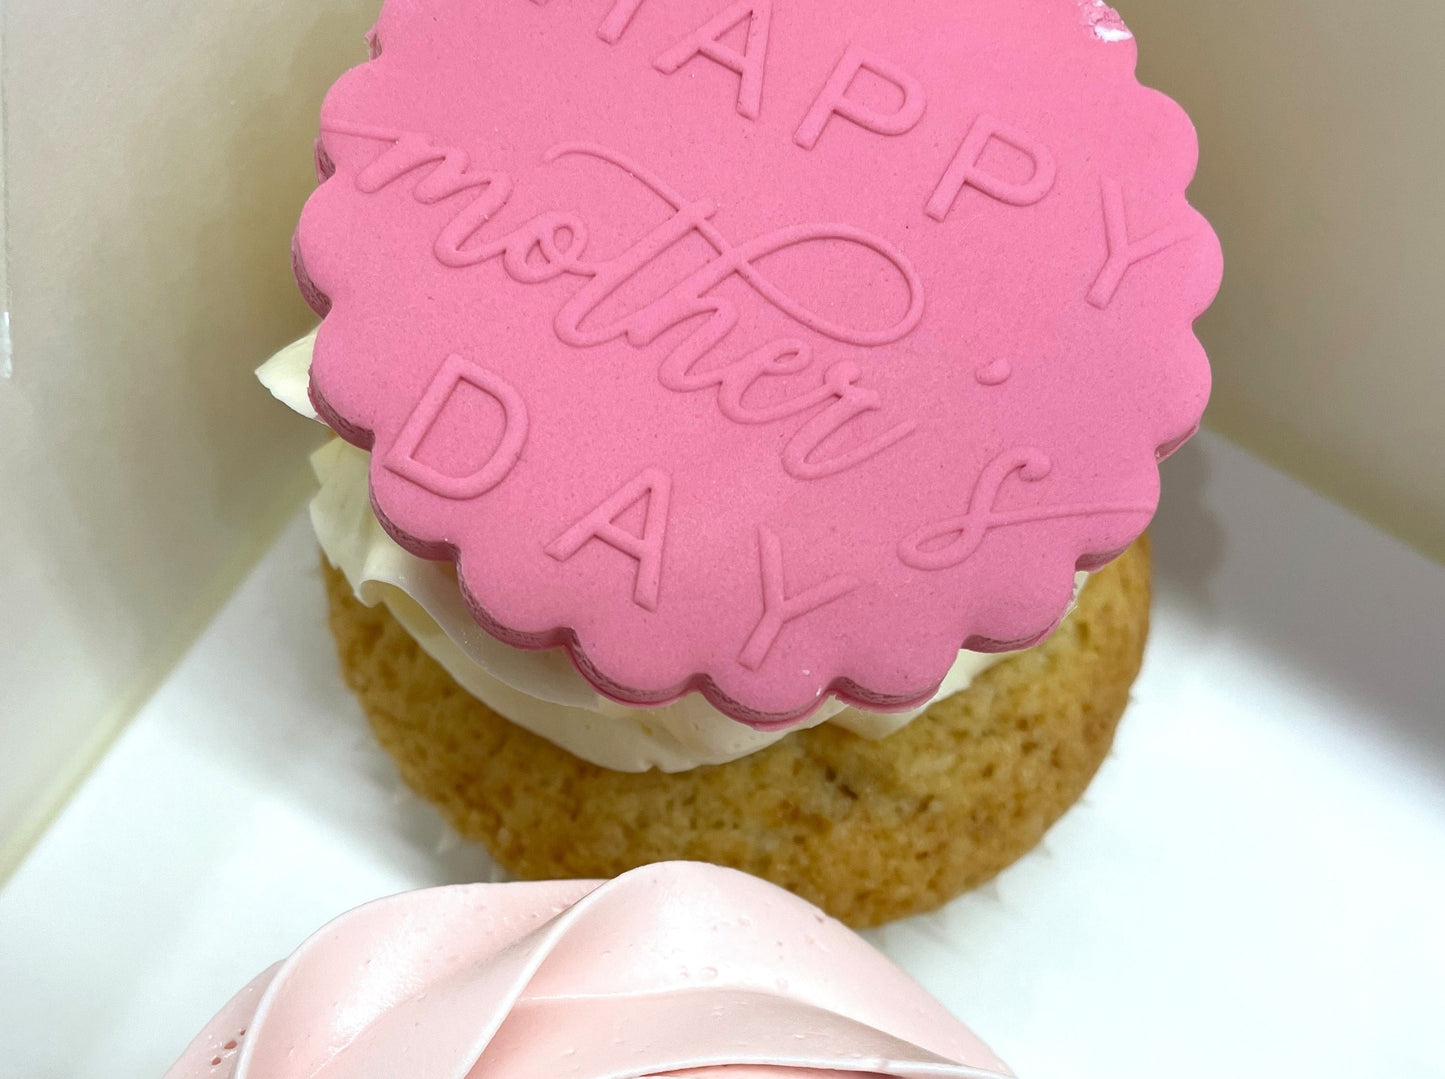 Mother's Day Cupcake Gift Box - 6 in a box